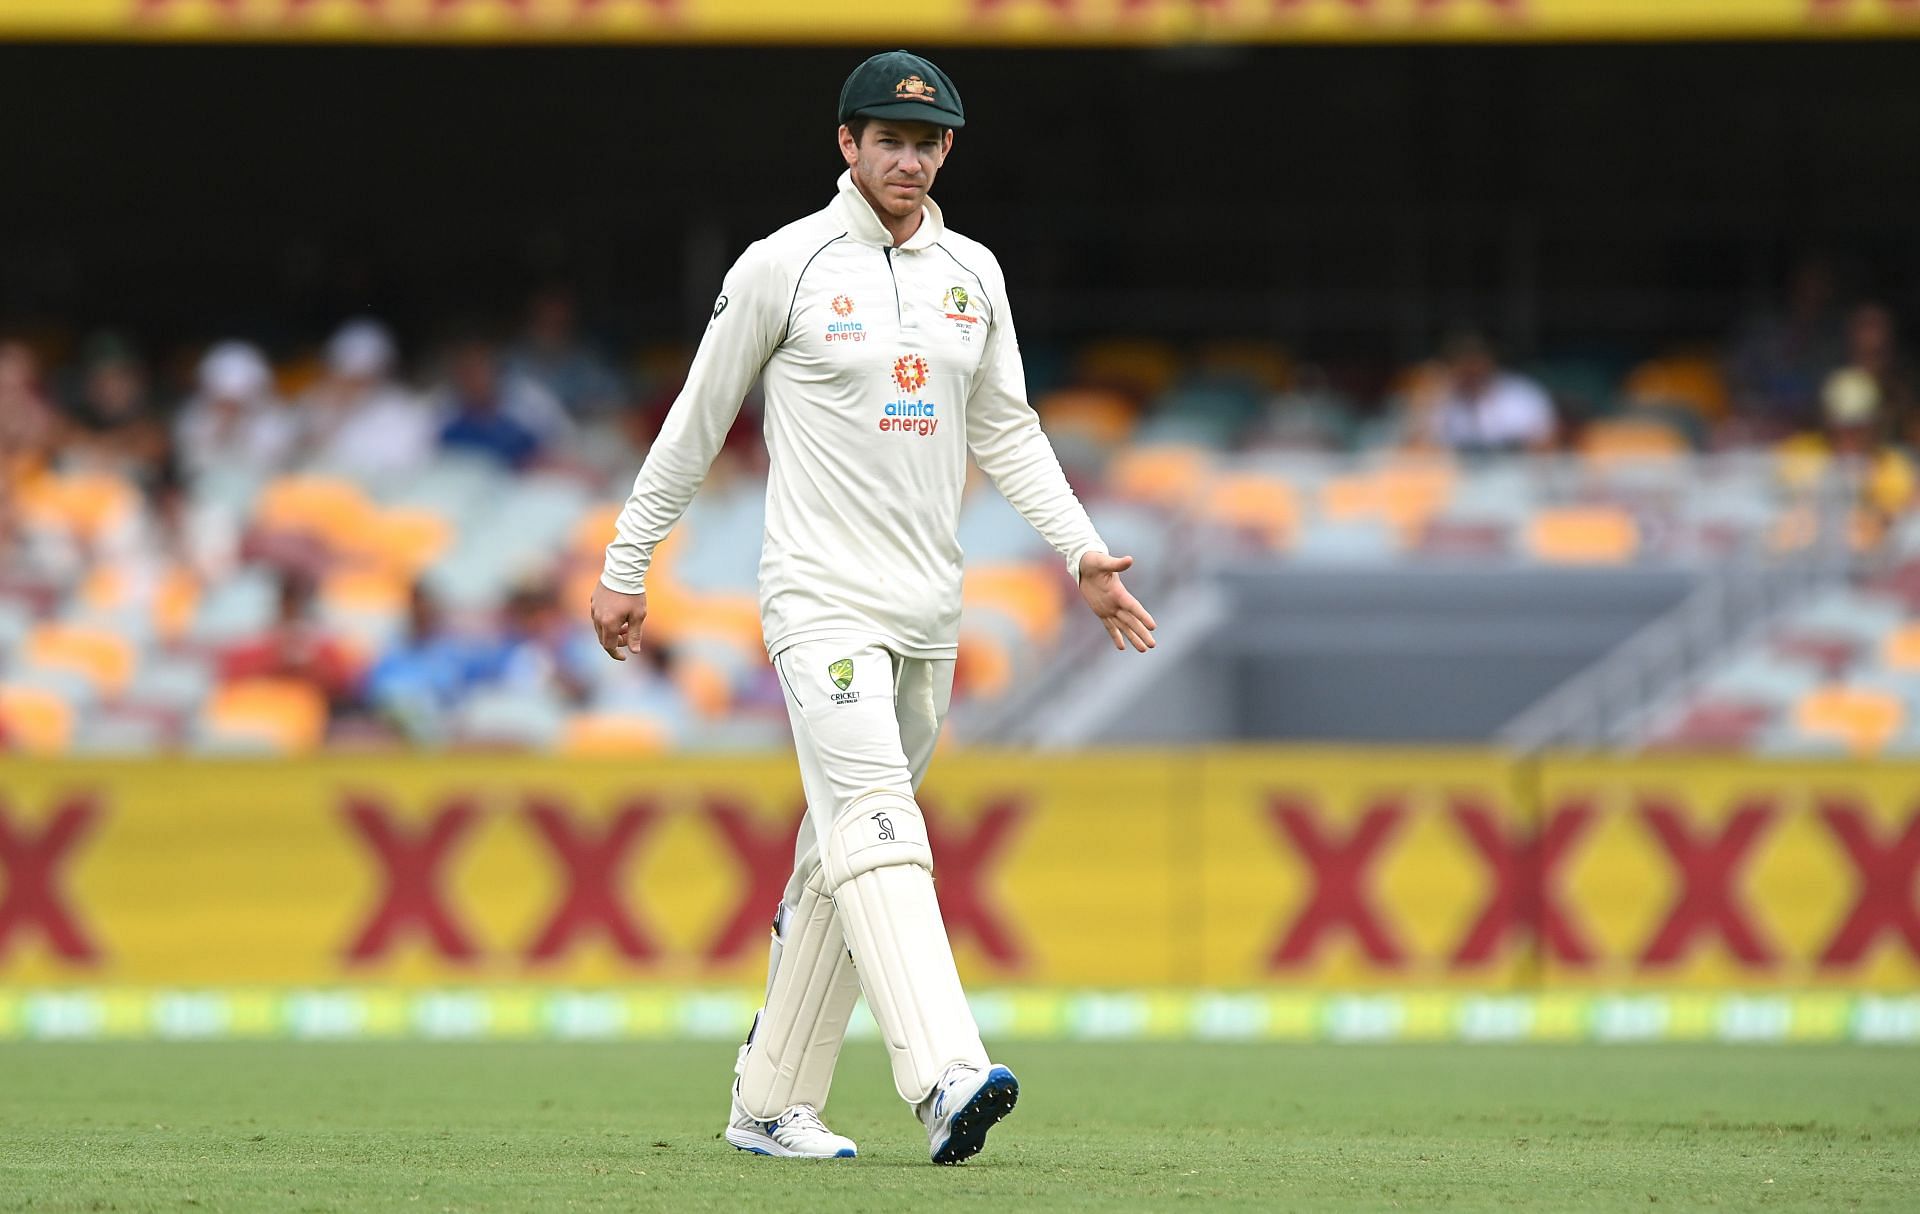 Tim Paine will be the player to watch out for in The Ashes